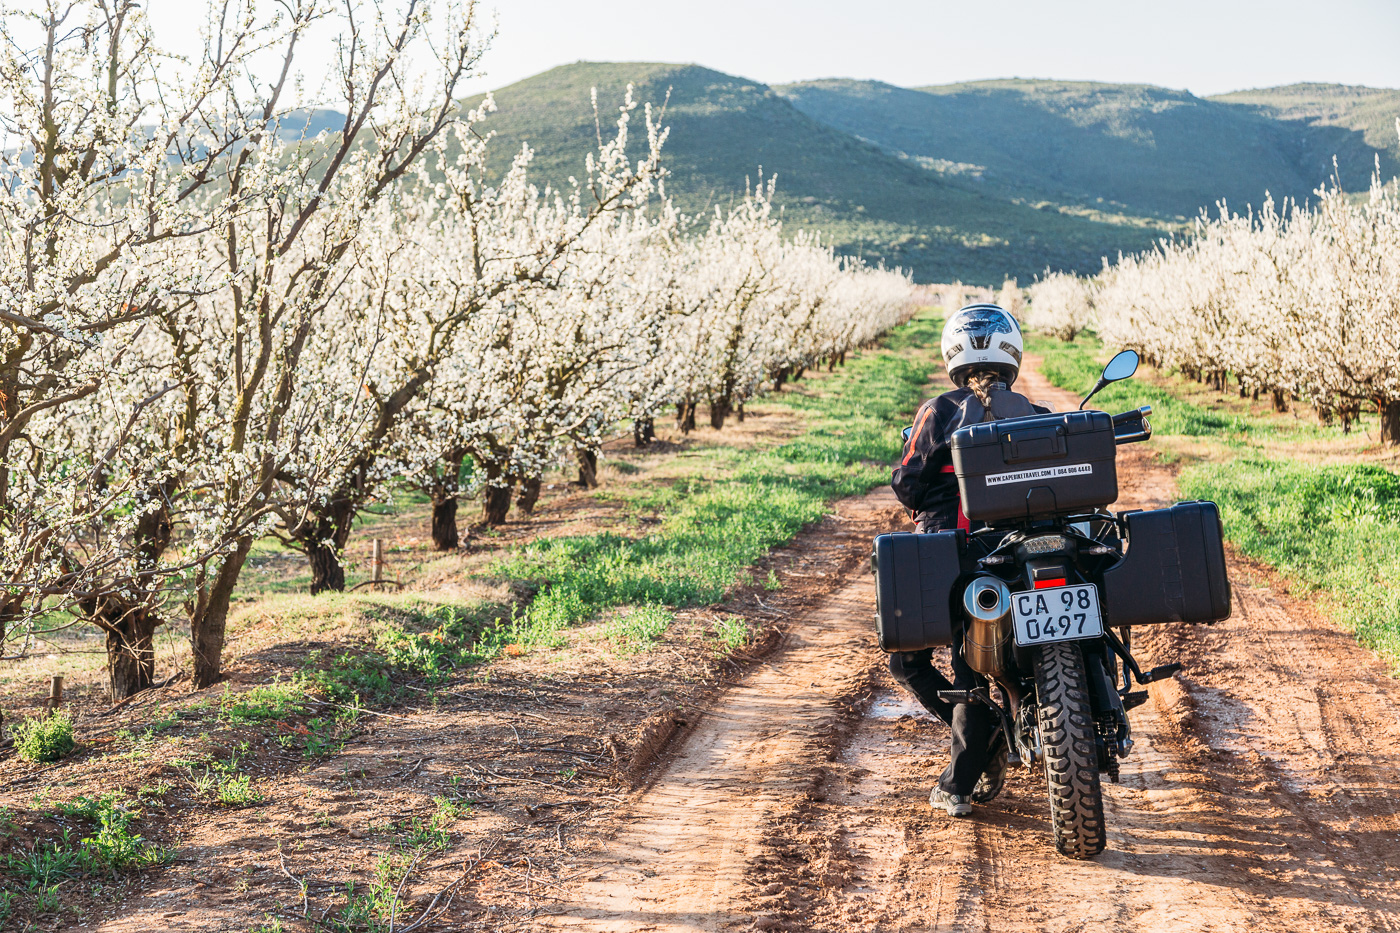 Getting lost in the orchards of the Little Karoo on Route 62 motorcycle tour